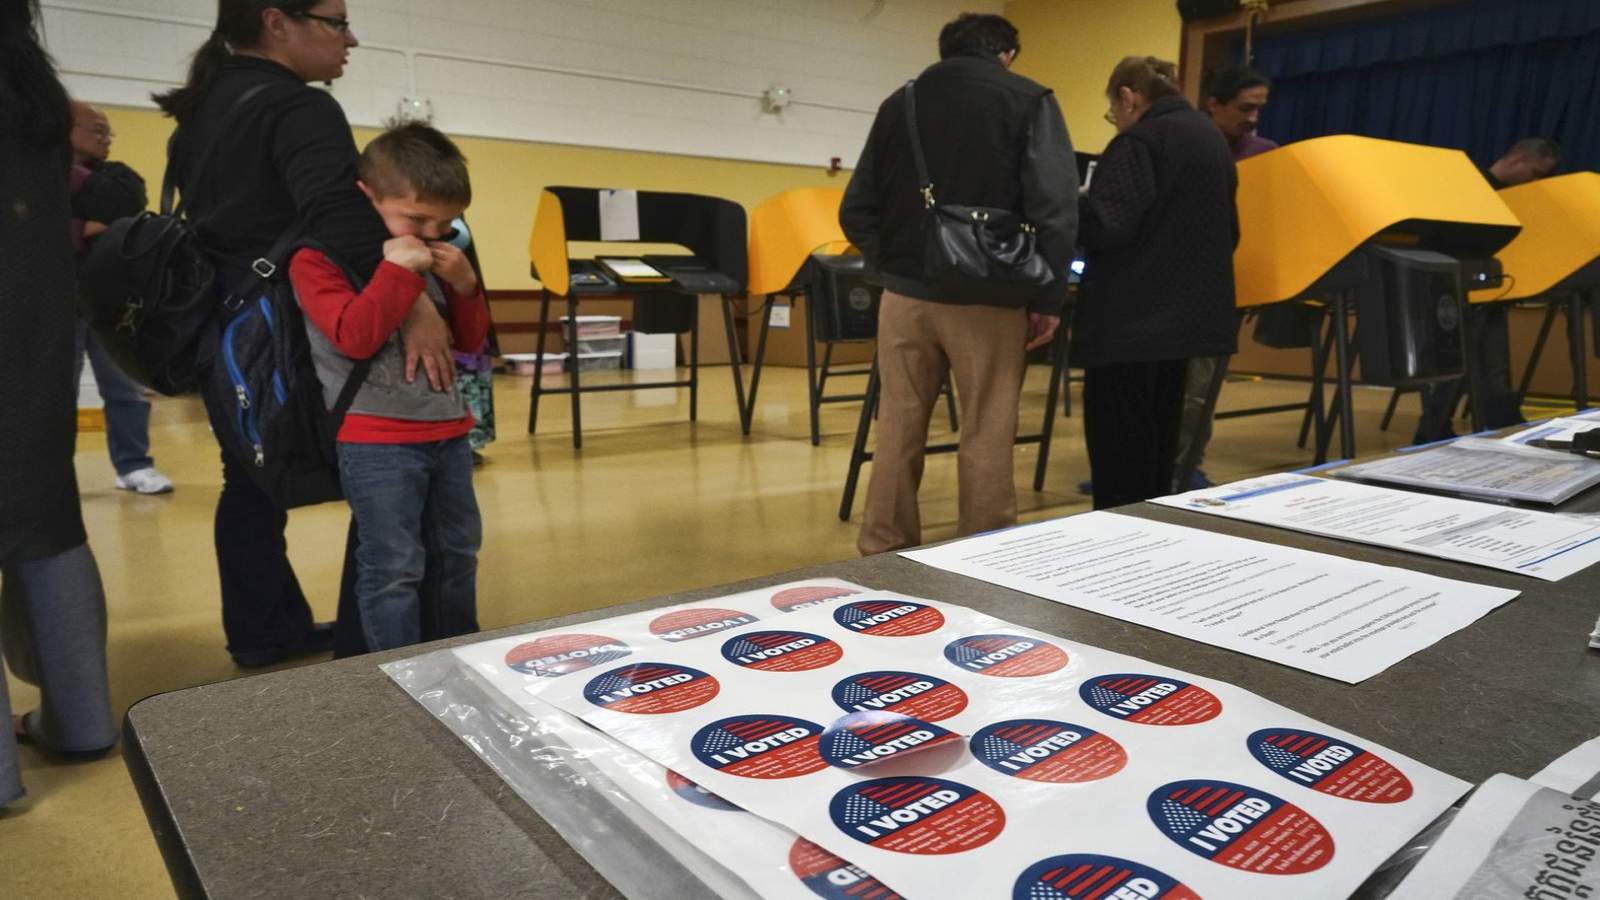 New battlegrounds emerge as voting patterns shift in some parts of Texas